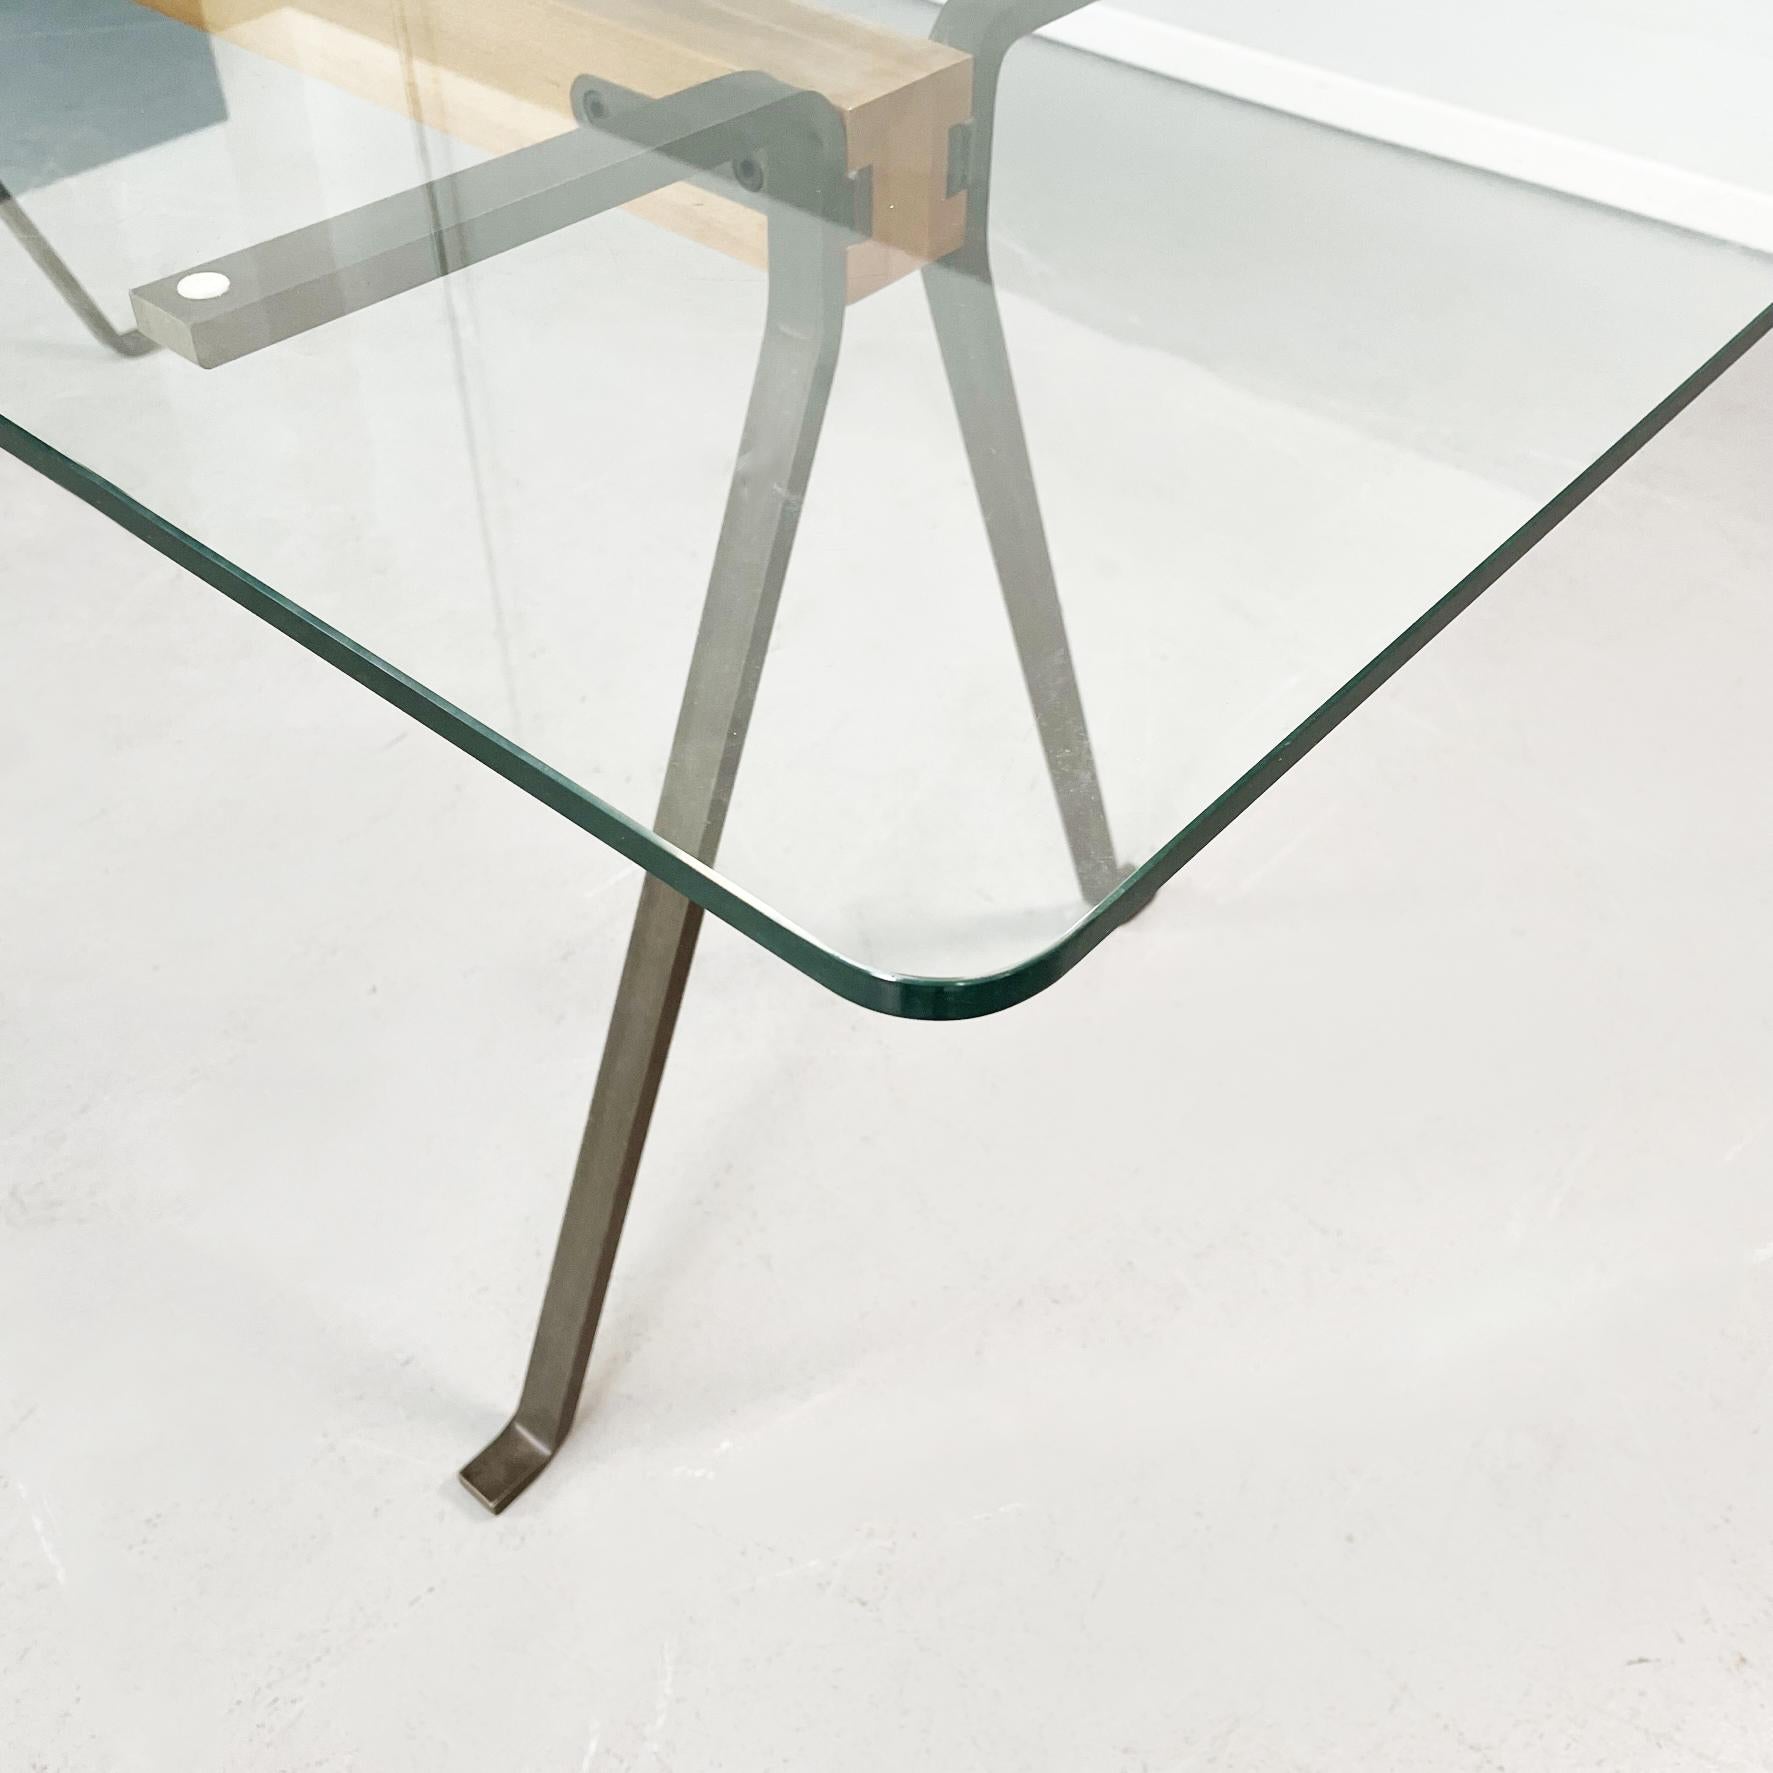 Late 20th Century Italian Modern Glass Wood Steel Dining Table Frate by Enzo Mari for Driade, 1973 For Sale